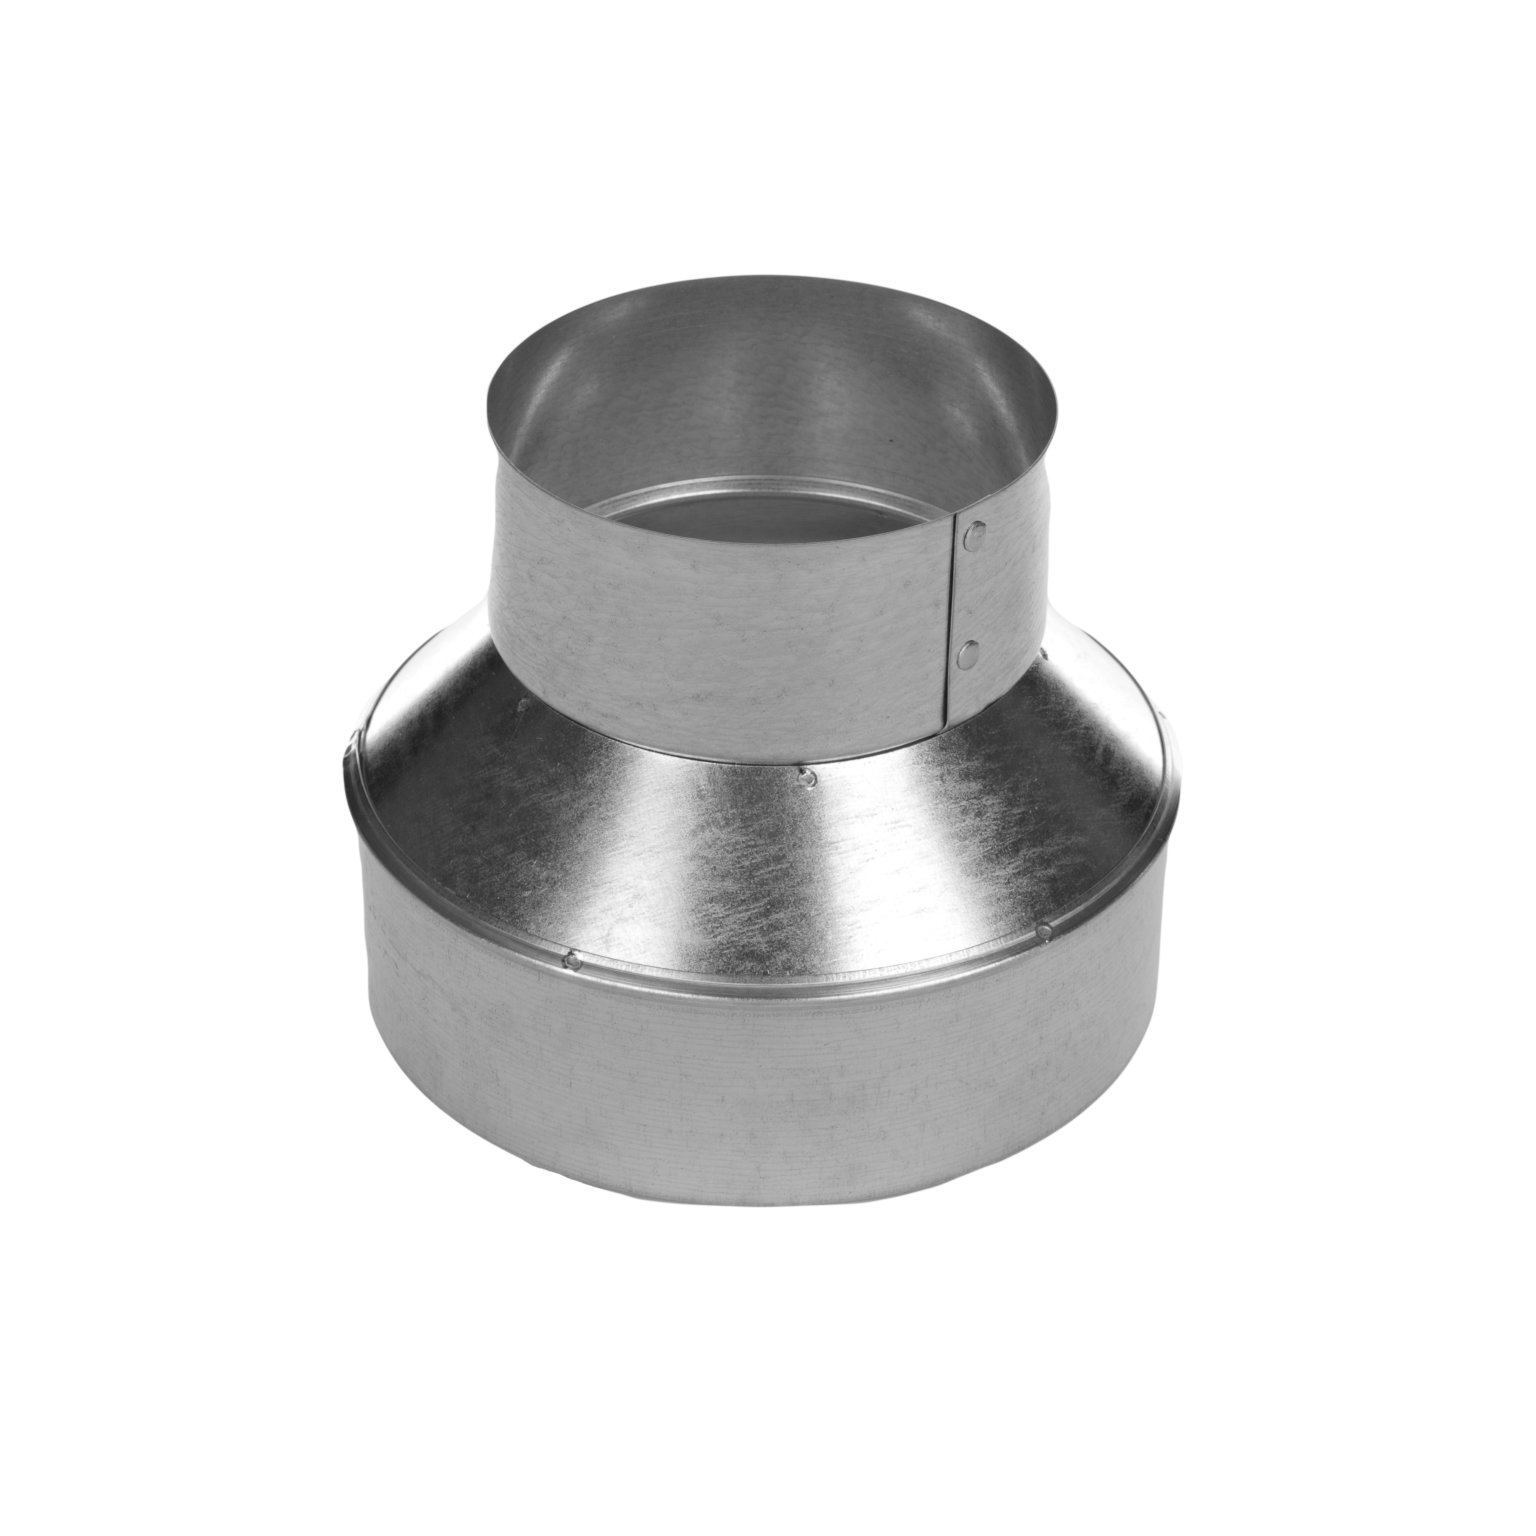 16x10 Round Duct Reducer 16" to 10" Adapter 